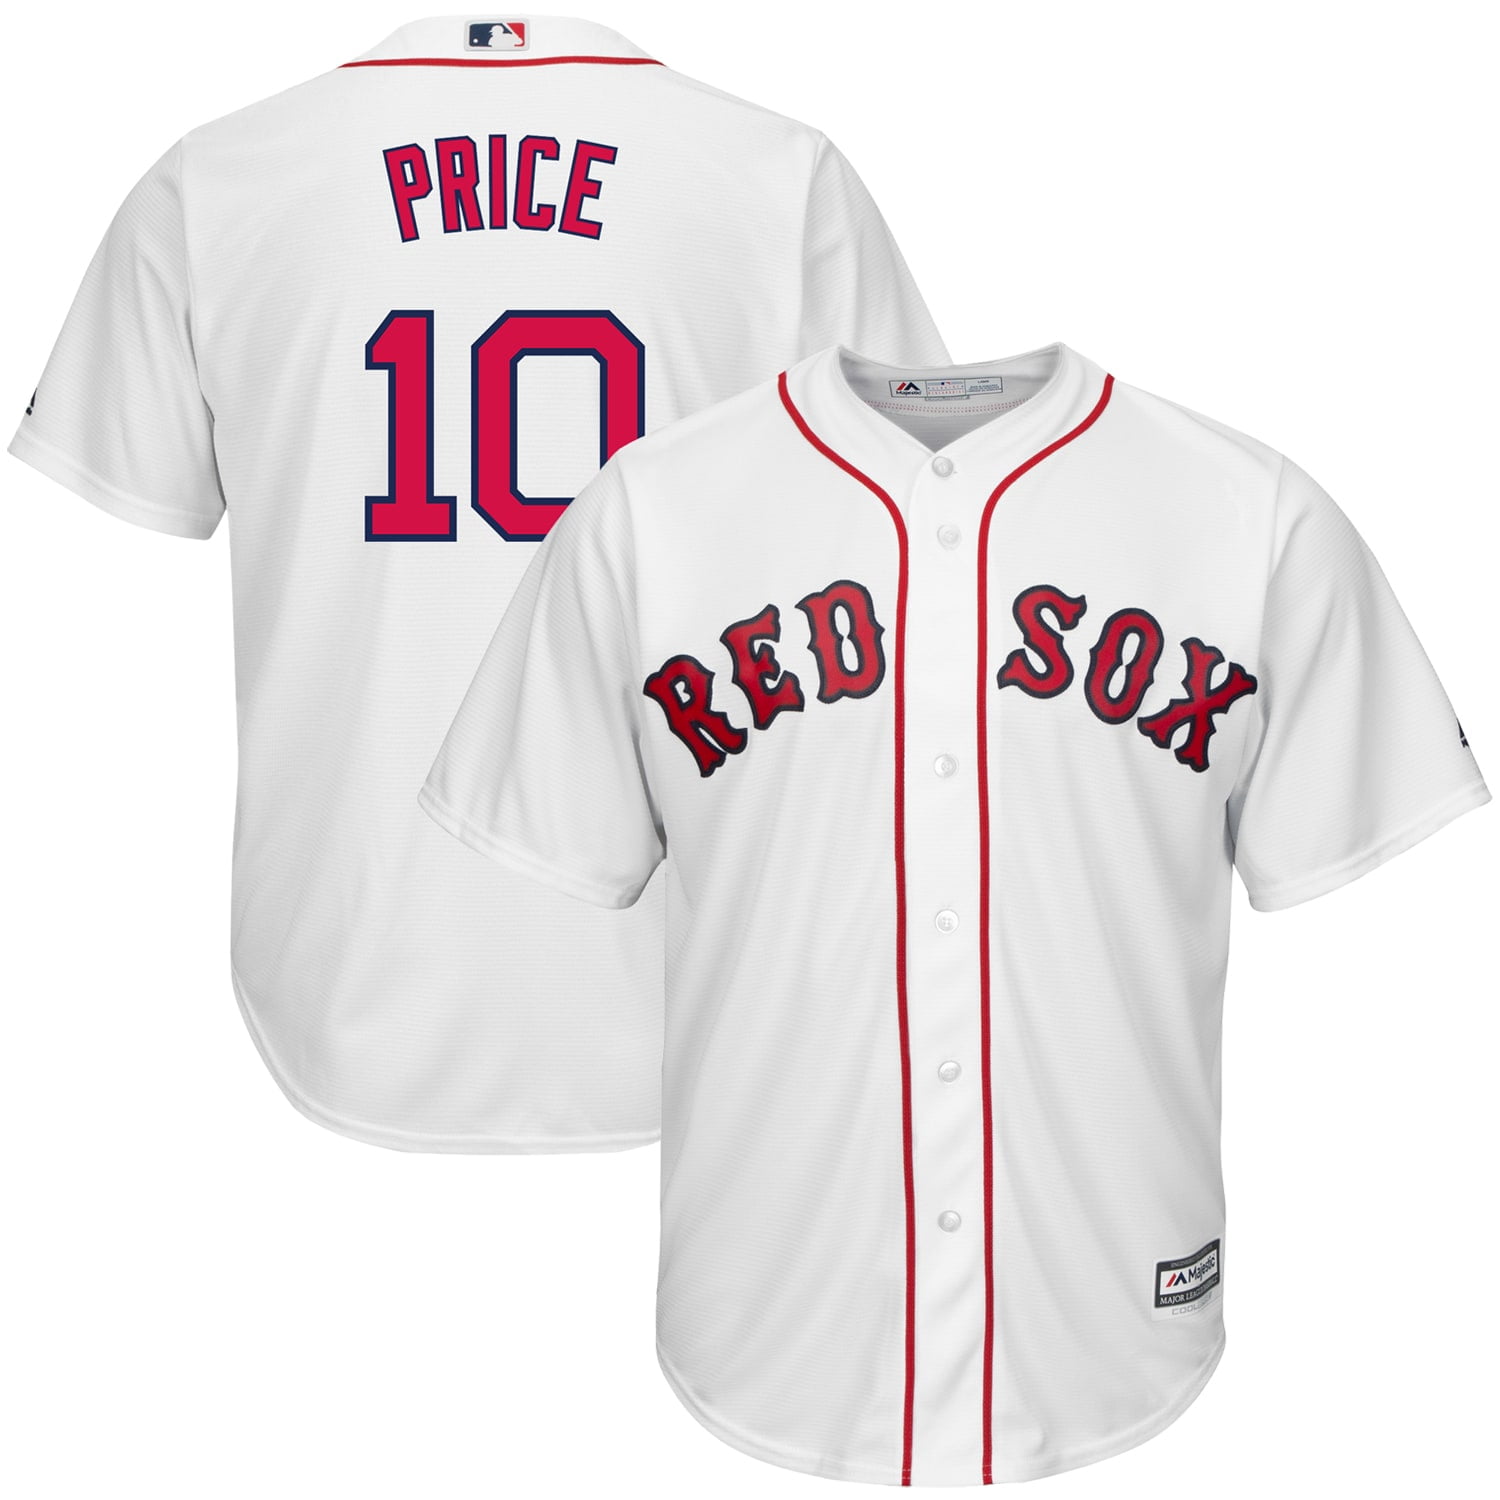 price of jersey